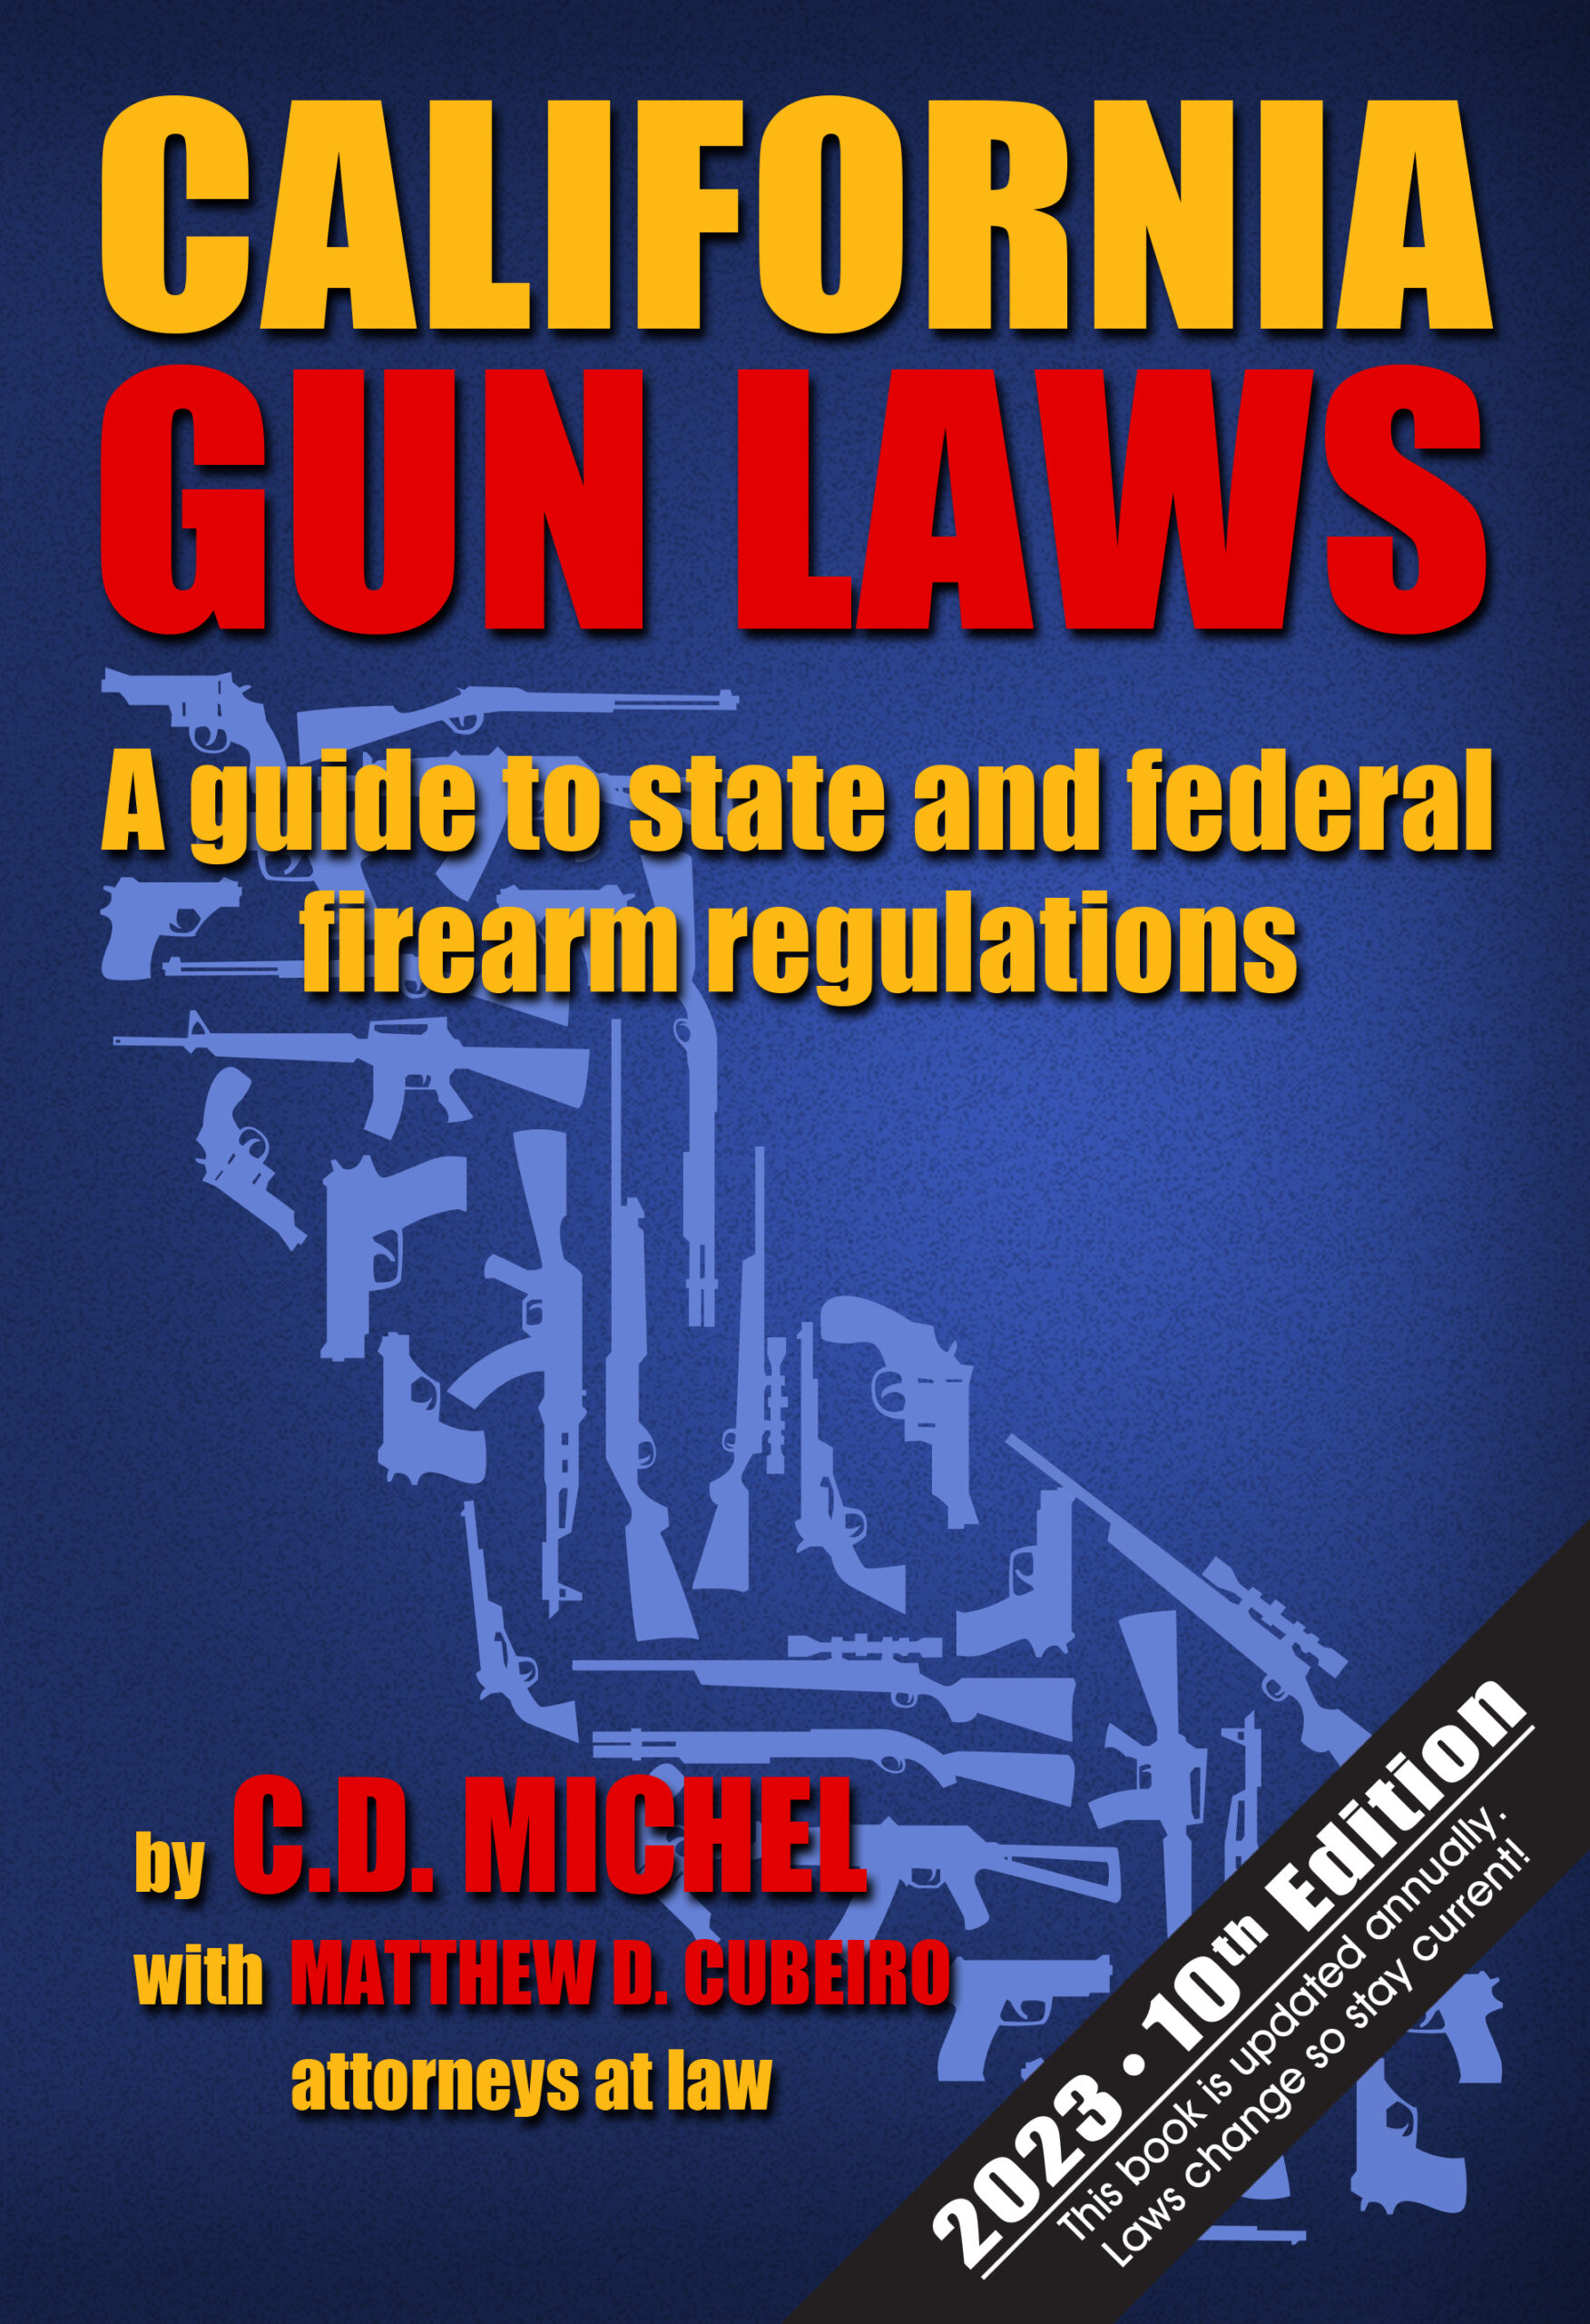 California Gun Laws Book Official Website A guide to state and